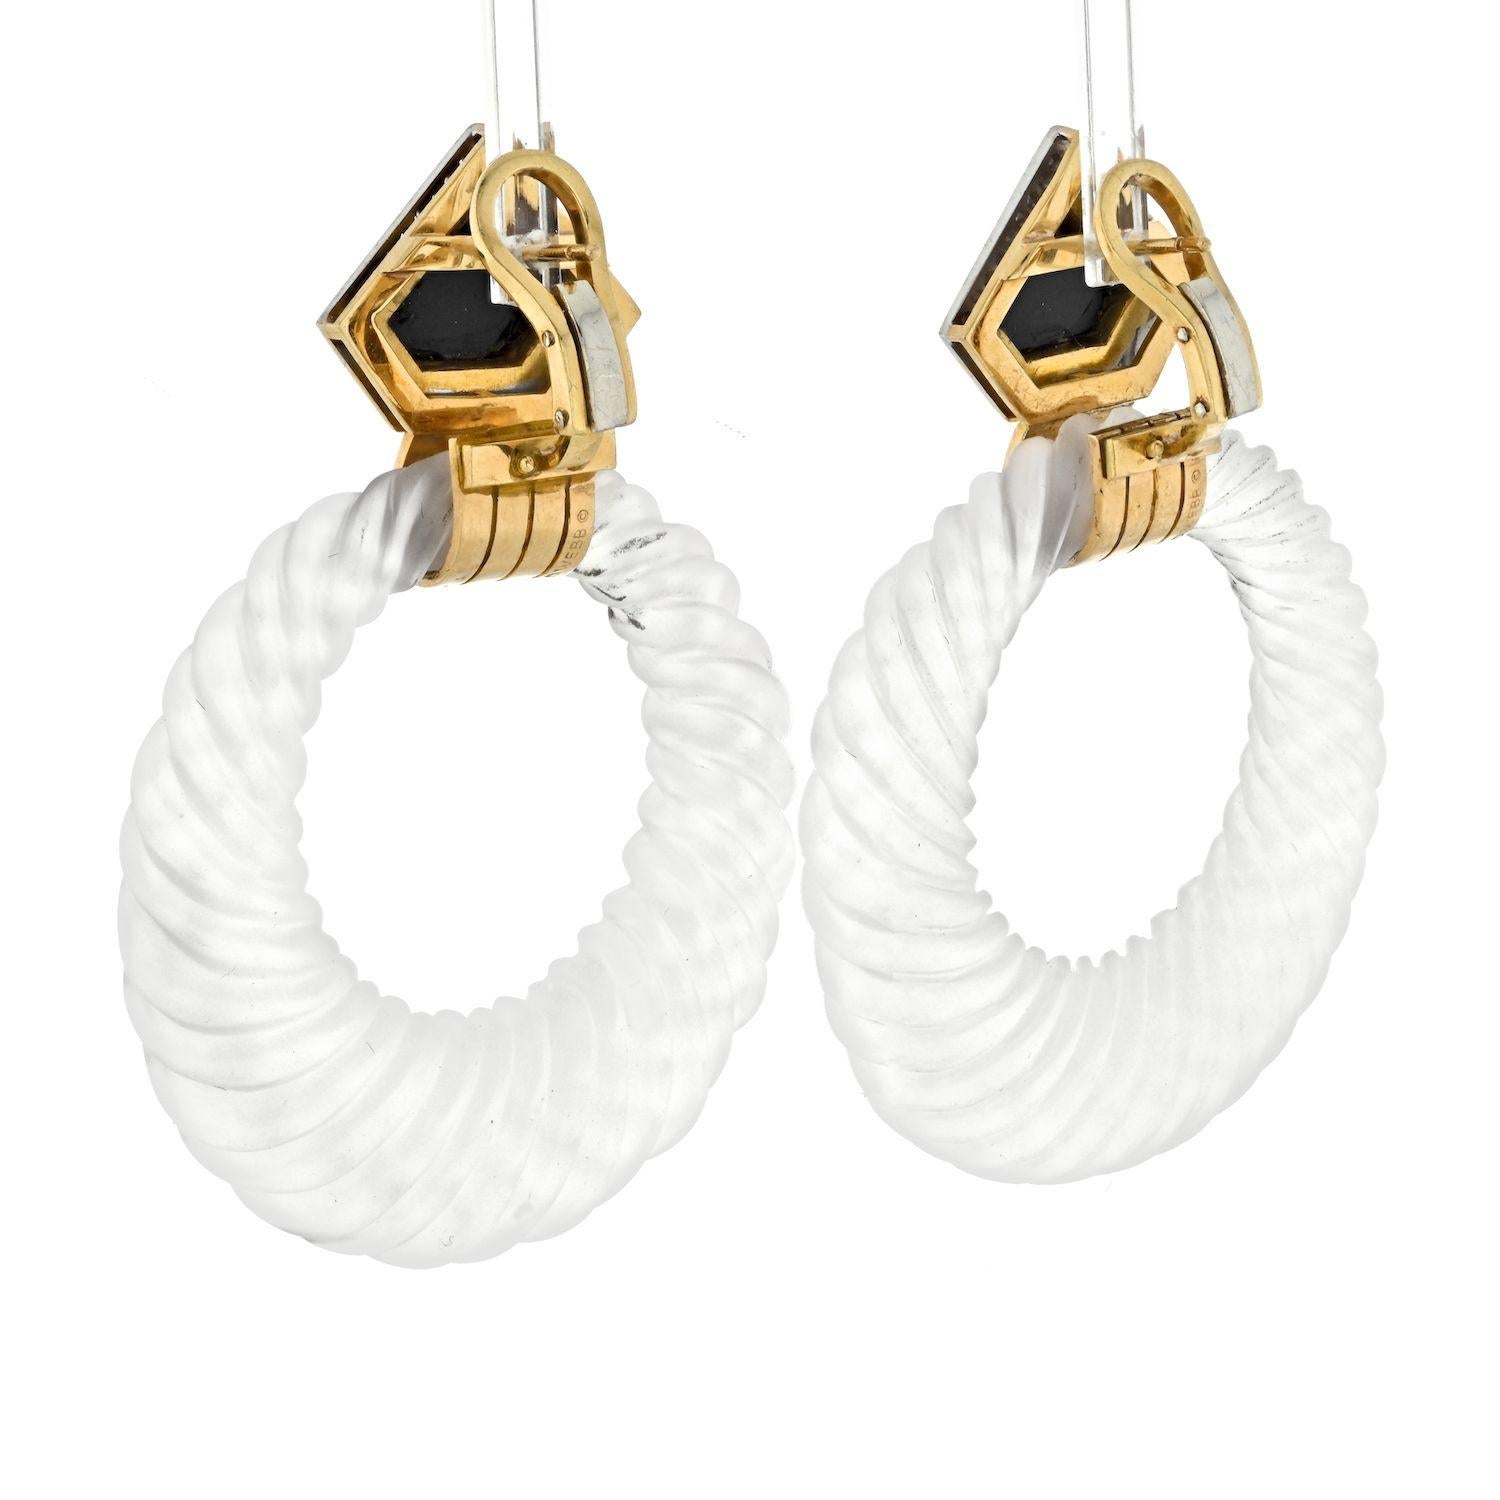 The description paints a vivid picture of an exquisite pair of earrings that exemplify the distinctive design and craftsmanship associated with David Webb. Let's break down the details:

**Design and Materials:**
- **Shield-shaped Surmount:**
  The